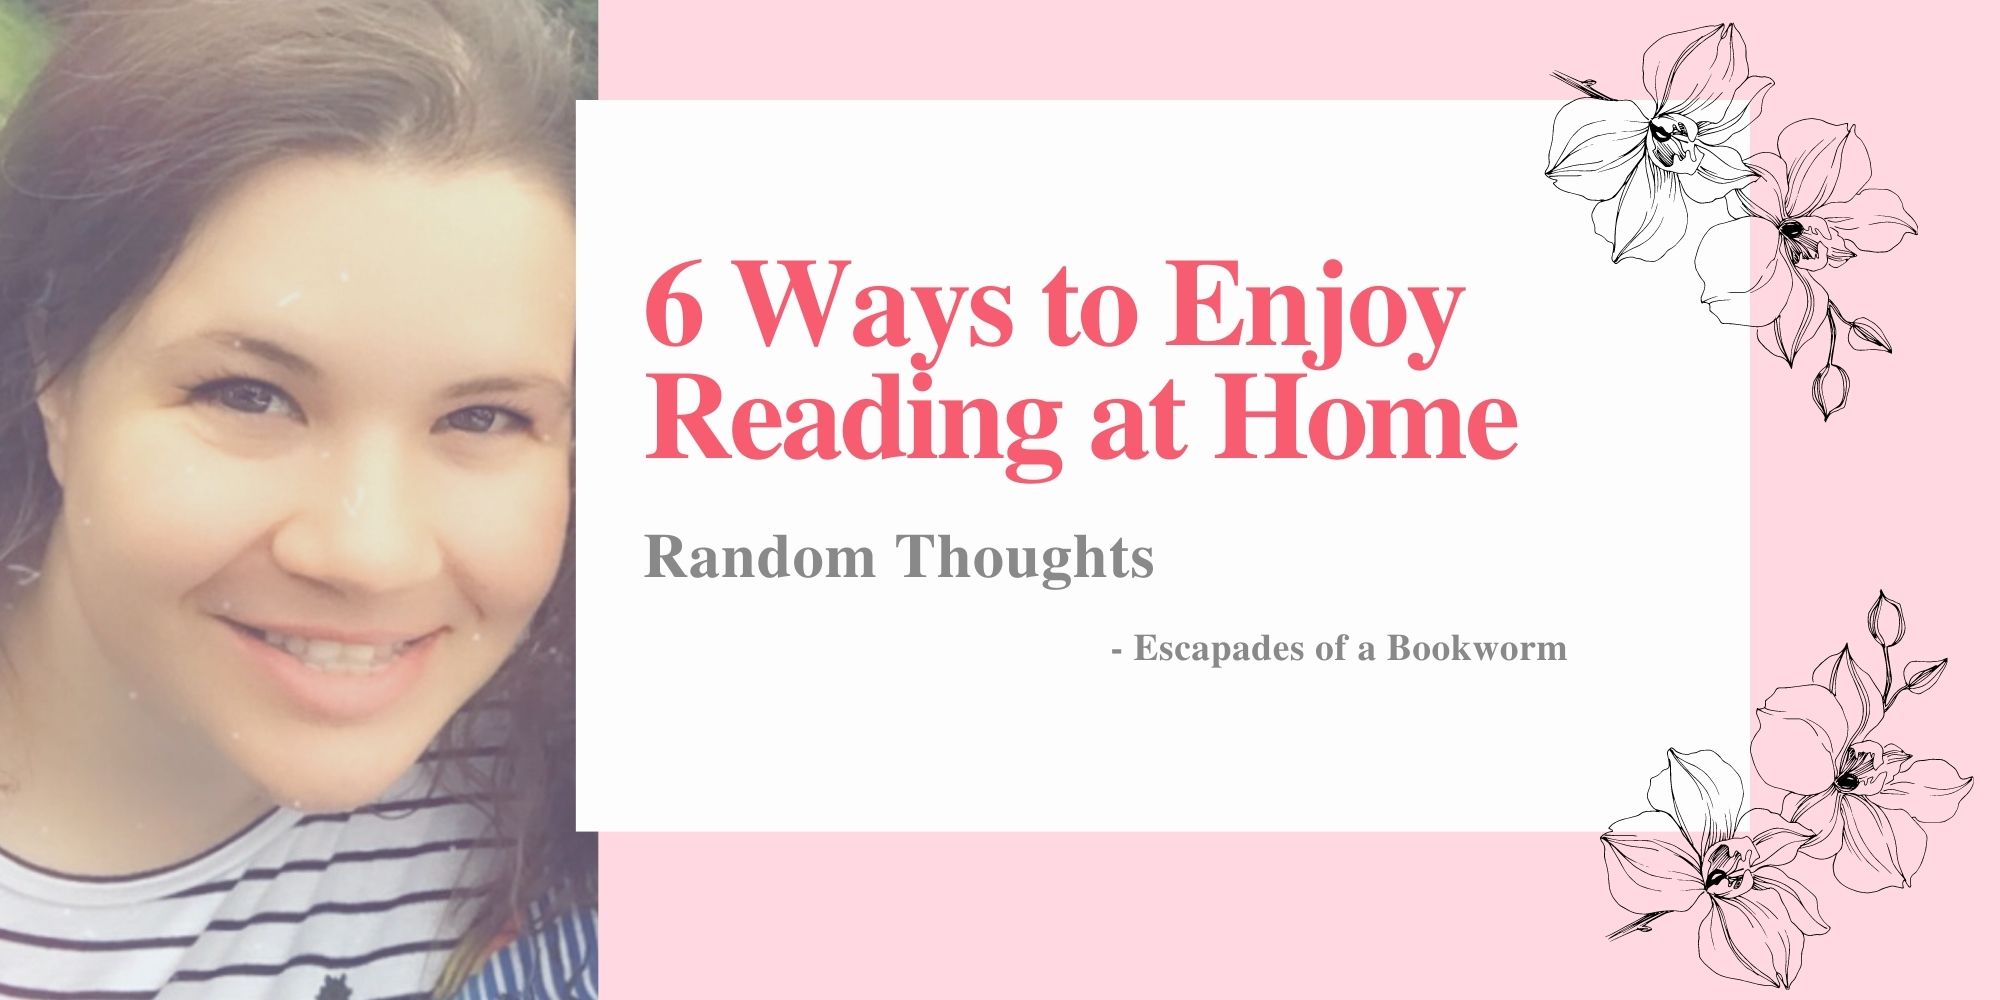 Random Thoughts 6 Ways to Enjoy Reading at Home